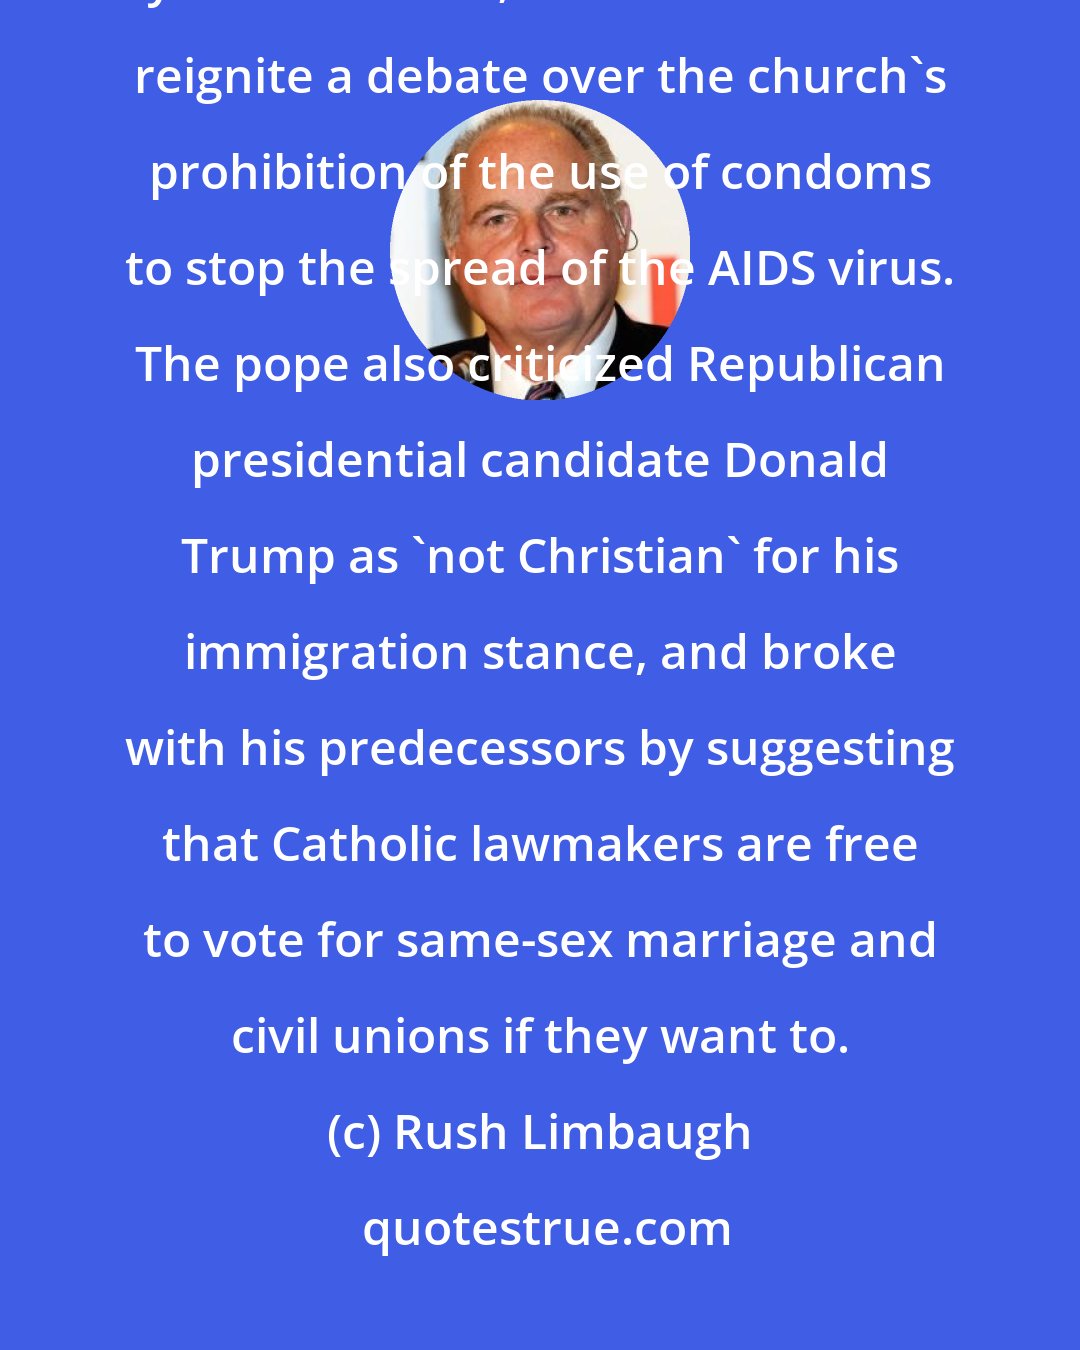 Rush Limbaugh: Pope Francis said the use of contraception could be justified in regions hit by the Zika virus; a stance that could reignite a debate over the church's prohibition of the use of condoms to stop the spread of the AIDS virus. The pope also criticized Republican presidential candidate Donald Trump as 'not Christian' for his immigration stance, and broke with his predecessors by suggesting that Catholic lawmakers are free to vote for same-sex marriage and civil unions if they want to.